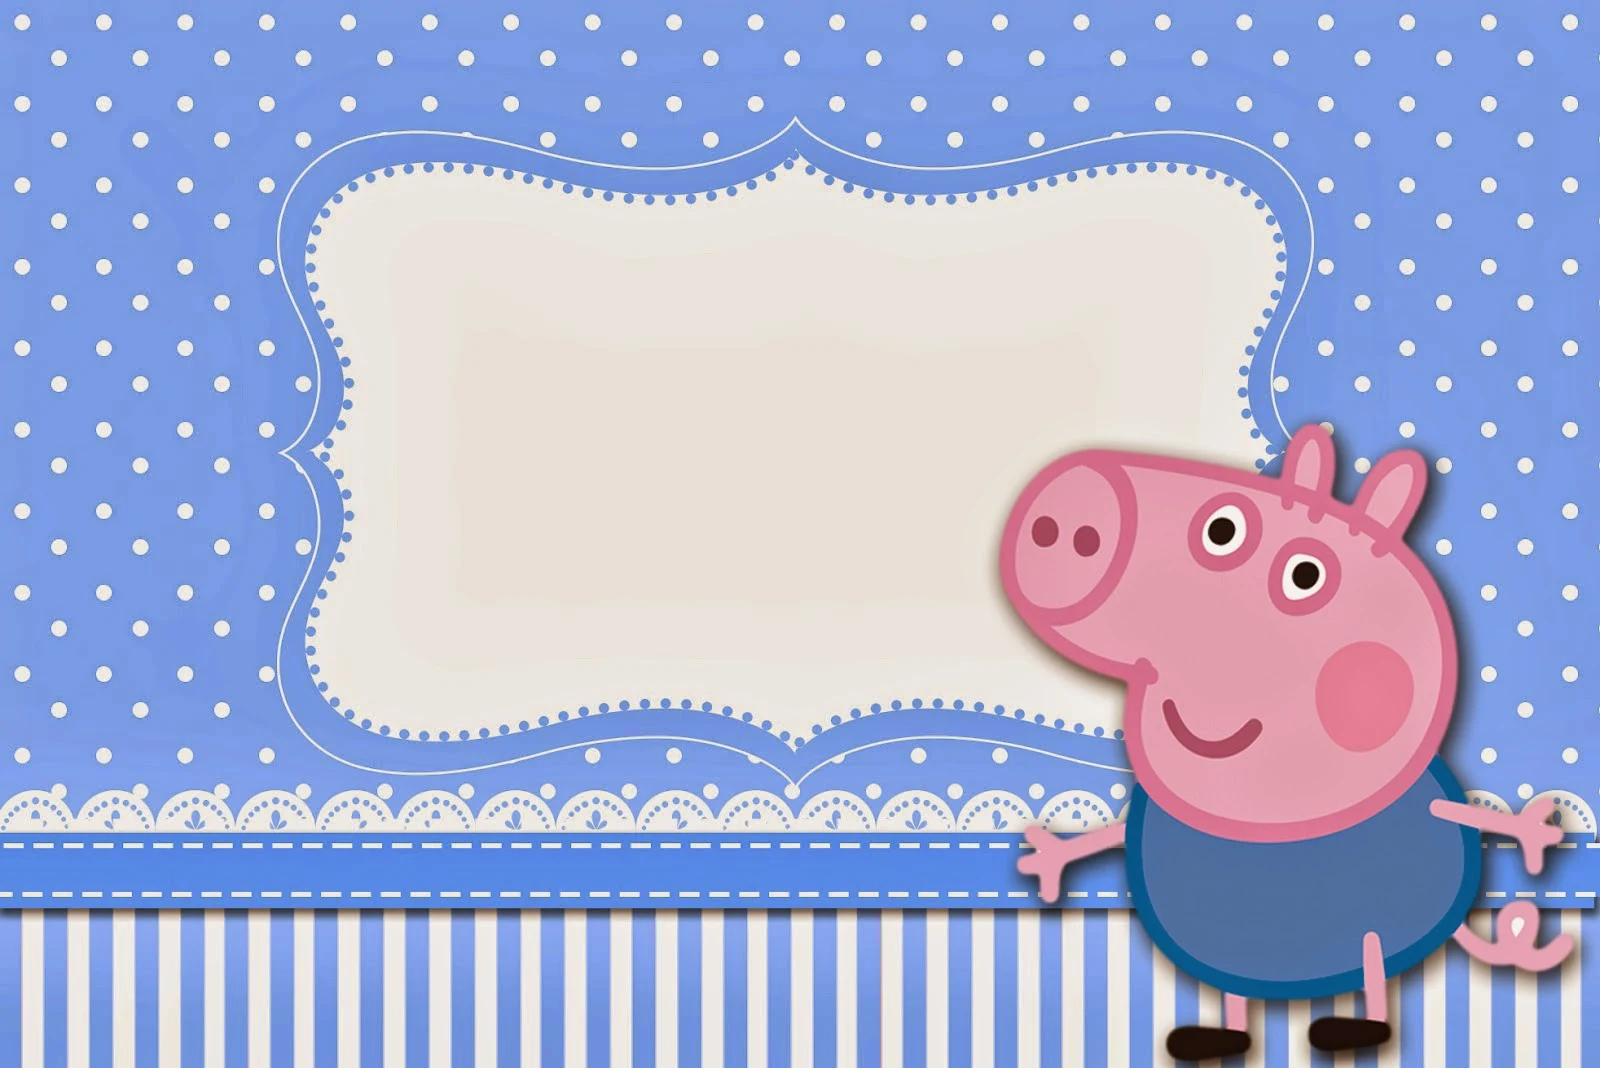 George Pig Free Printable Invitations, Cards or Photo Frames.